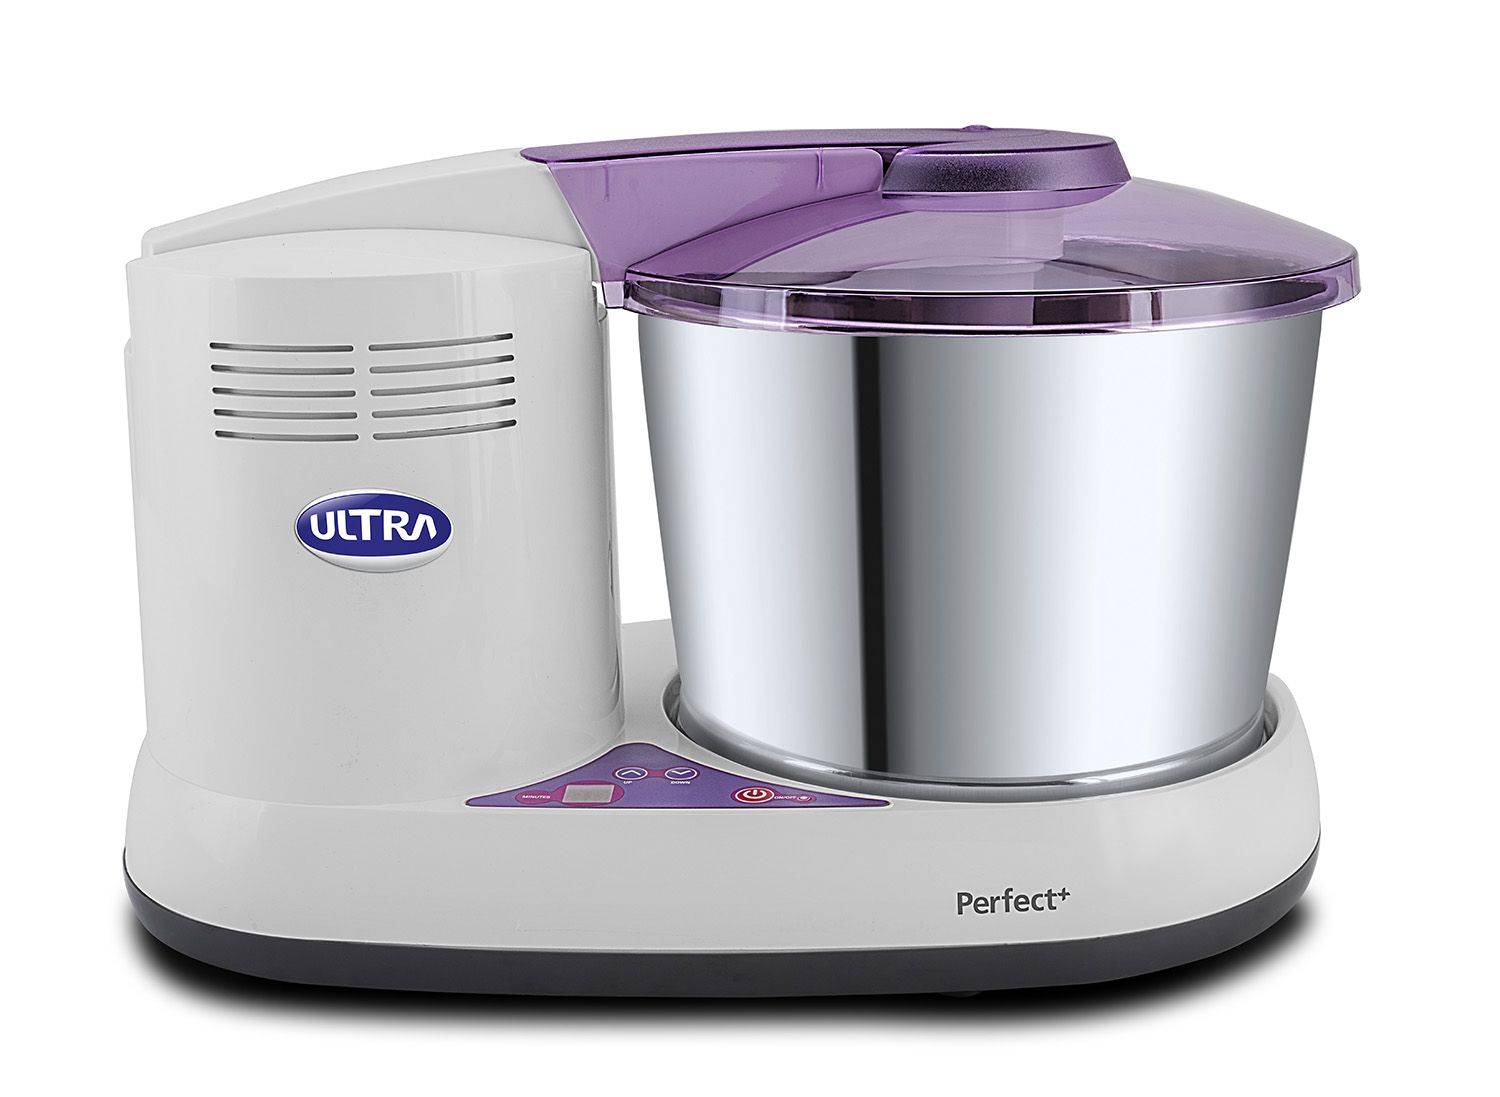 ELGI ULTRA PERFECT PLUS WITH TIMER WET GRINDER, 2 LITRES, 110 VOLTS FOR USE IN USA & CANADA ONLY